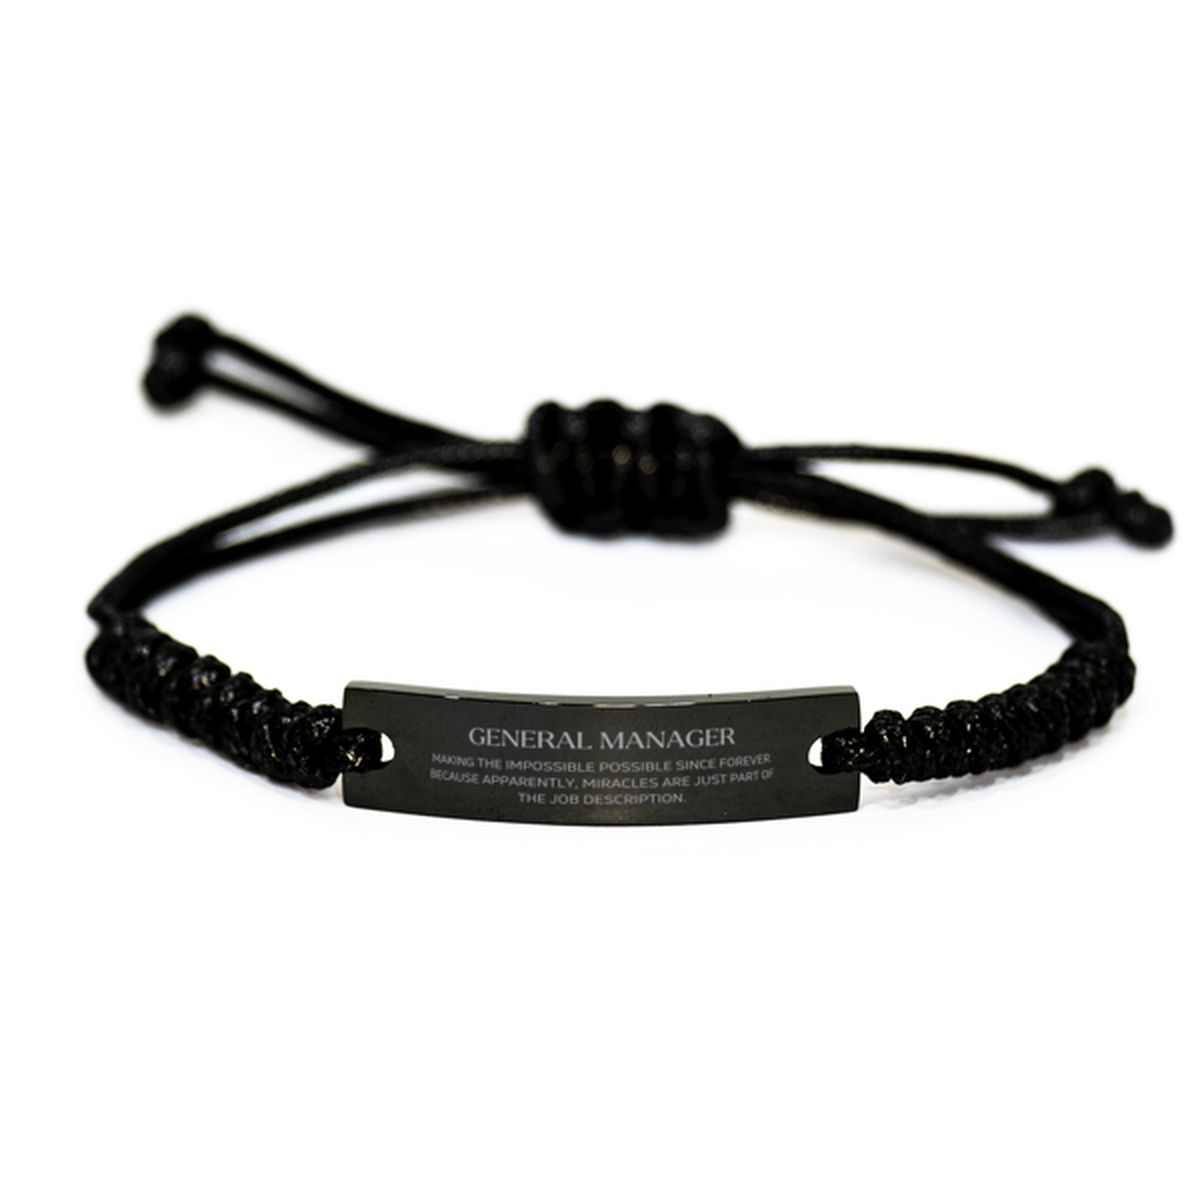 Funny General Manager Gifts, Miracles are just part of the job description, Inspirational Birthday Black Rope Bracelet For General Manager, Men, Women, Coworkers, Friends, Boss